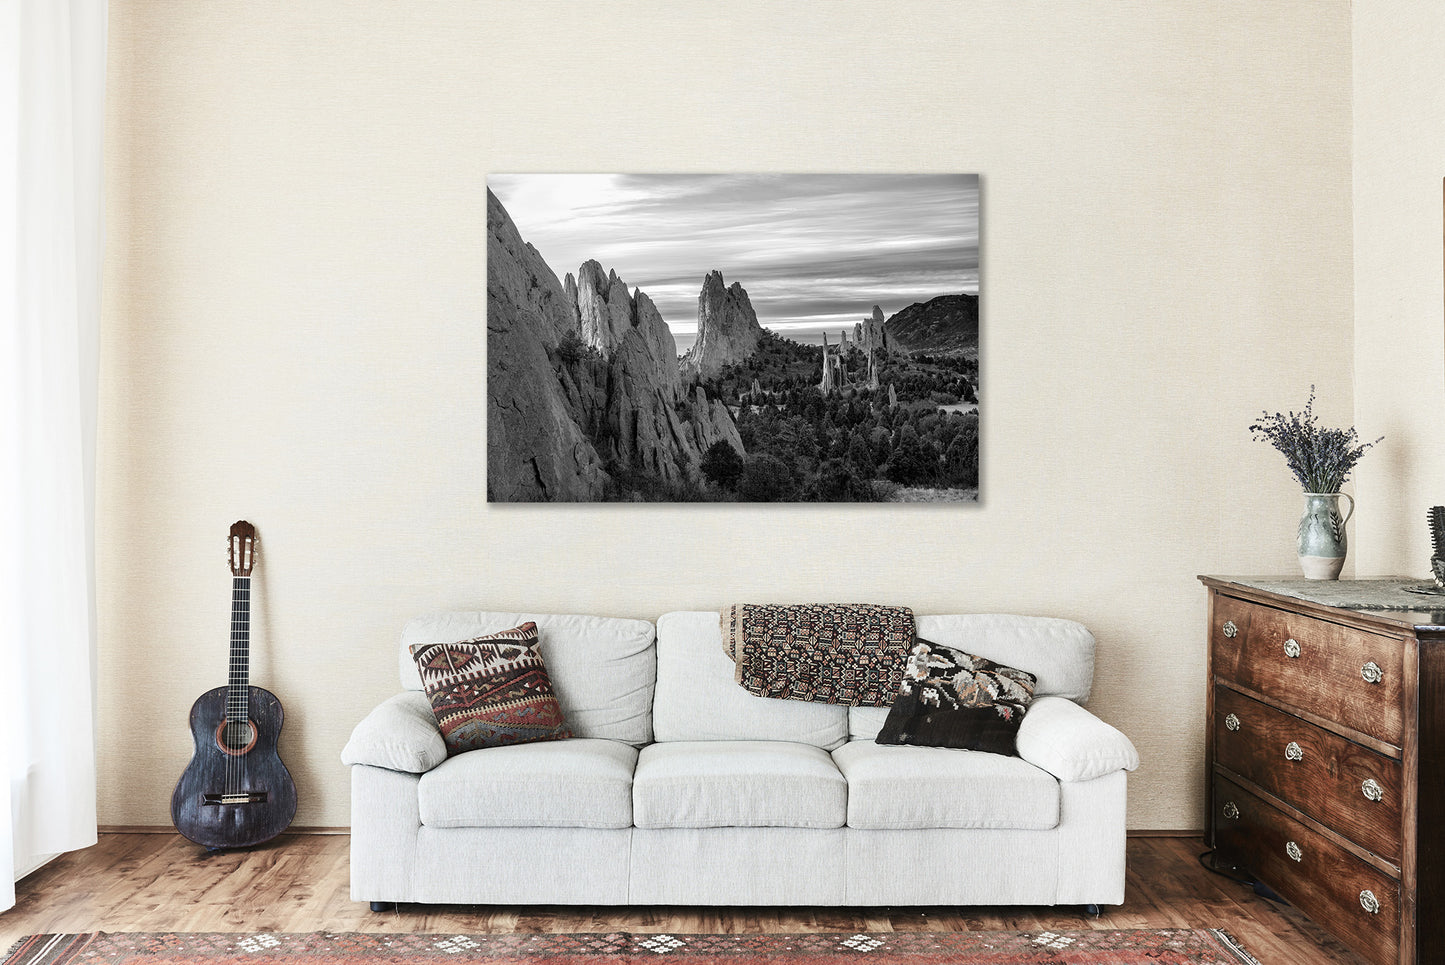 Landscape Canvas Wall Art - Black and White Gallery Wrap of Garden of the Gods in Colorado Springs - Photography Artwork Photo Decor